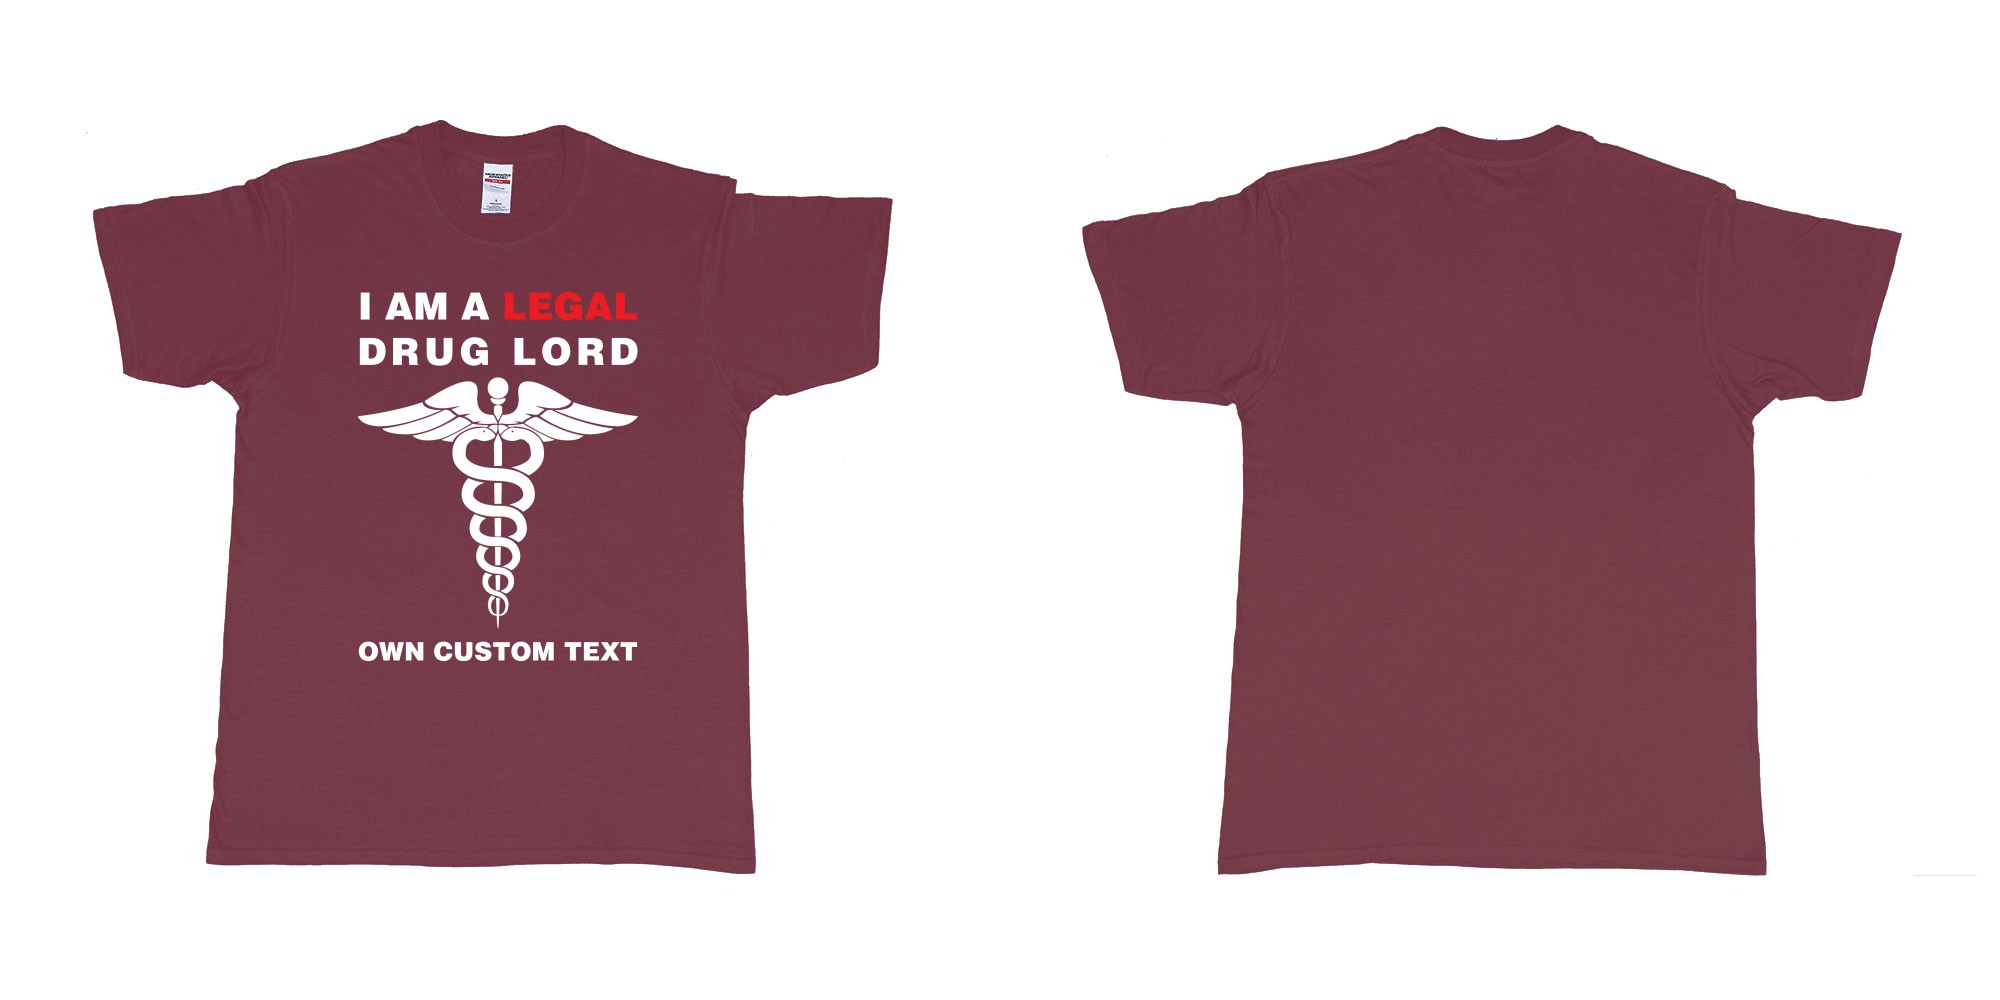 Custom tshirt design legal drug lord in fabric color marron choice your own text made in Bali by The Pirate Way